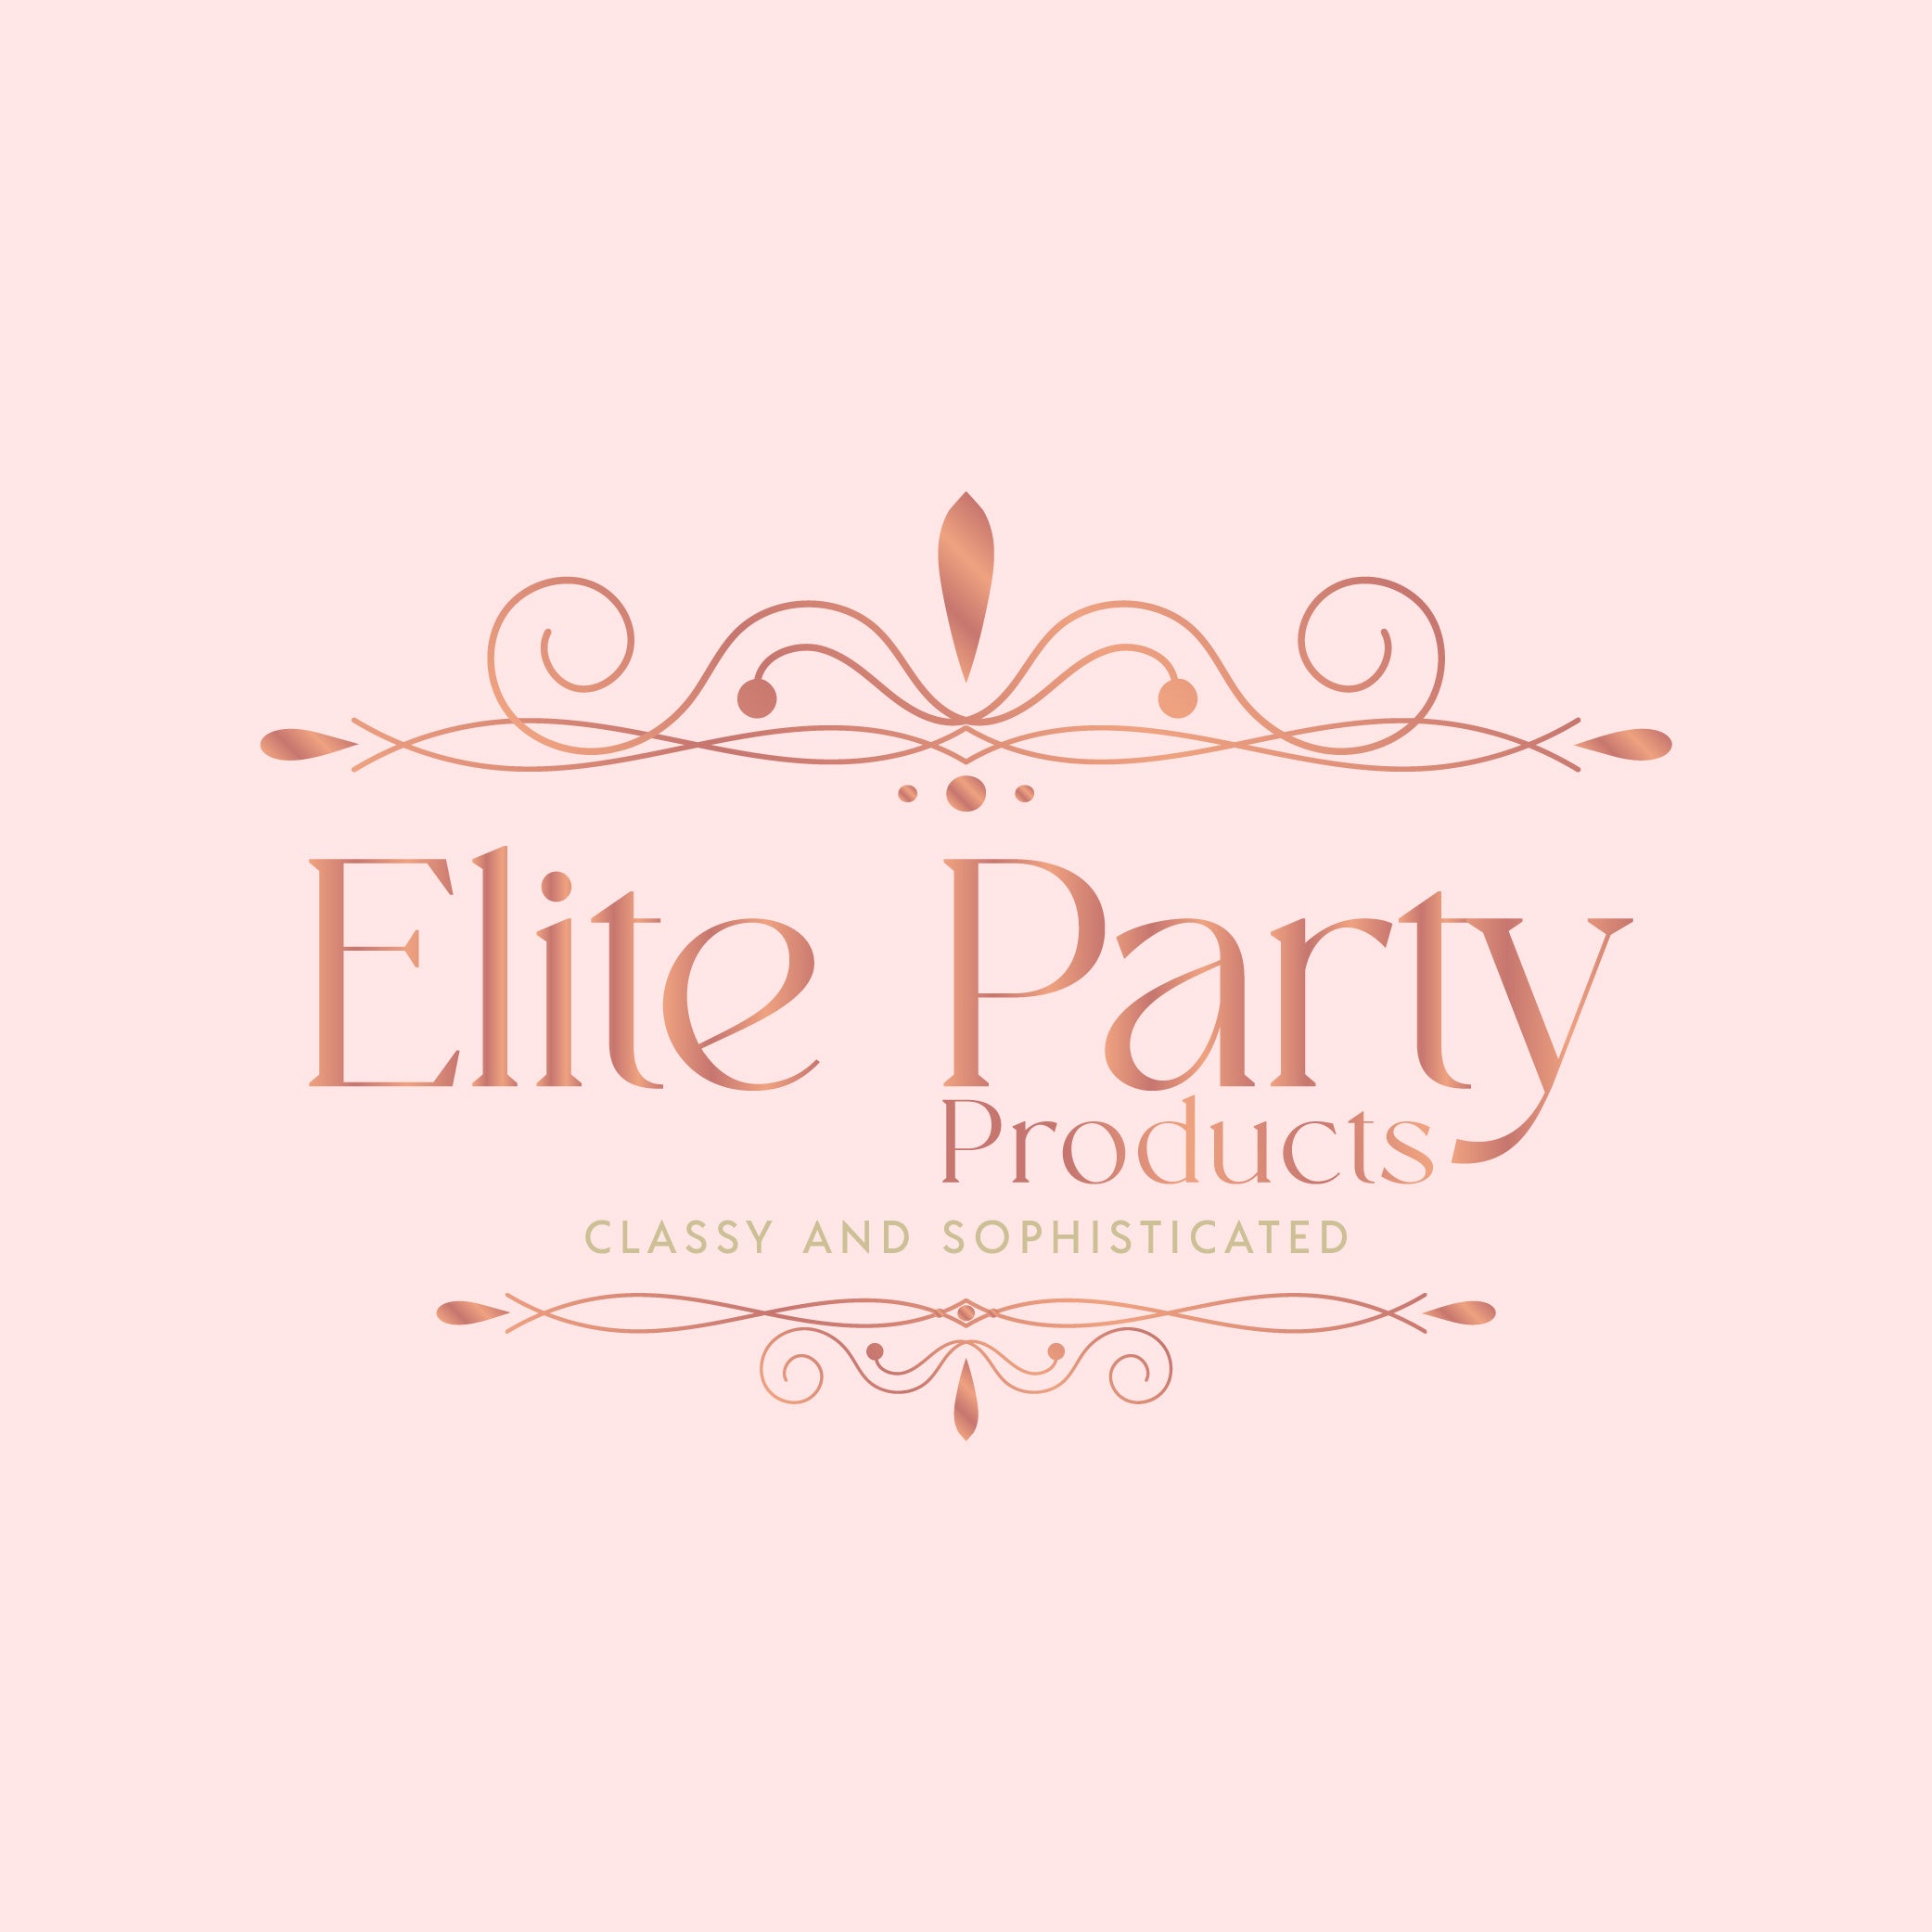 Elite Party Products